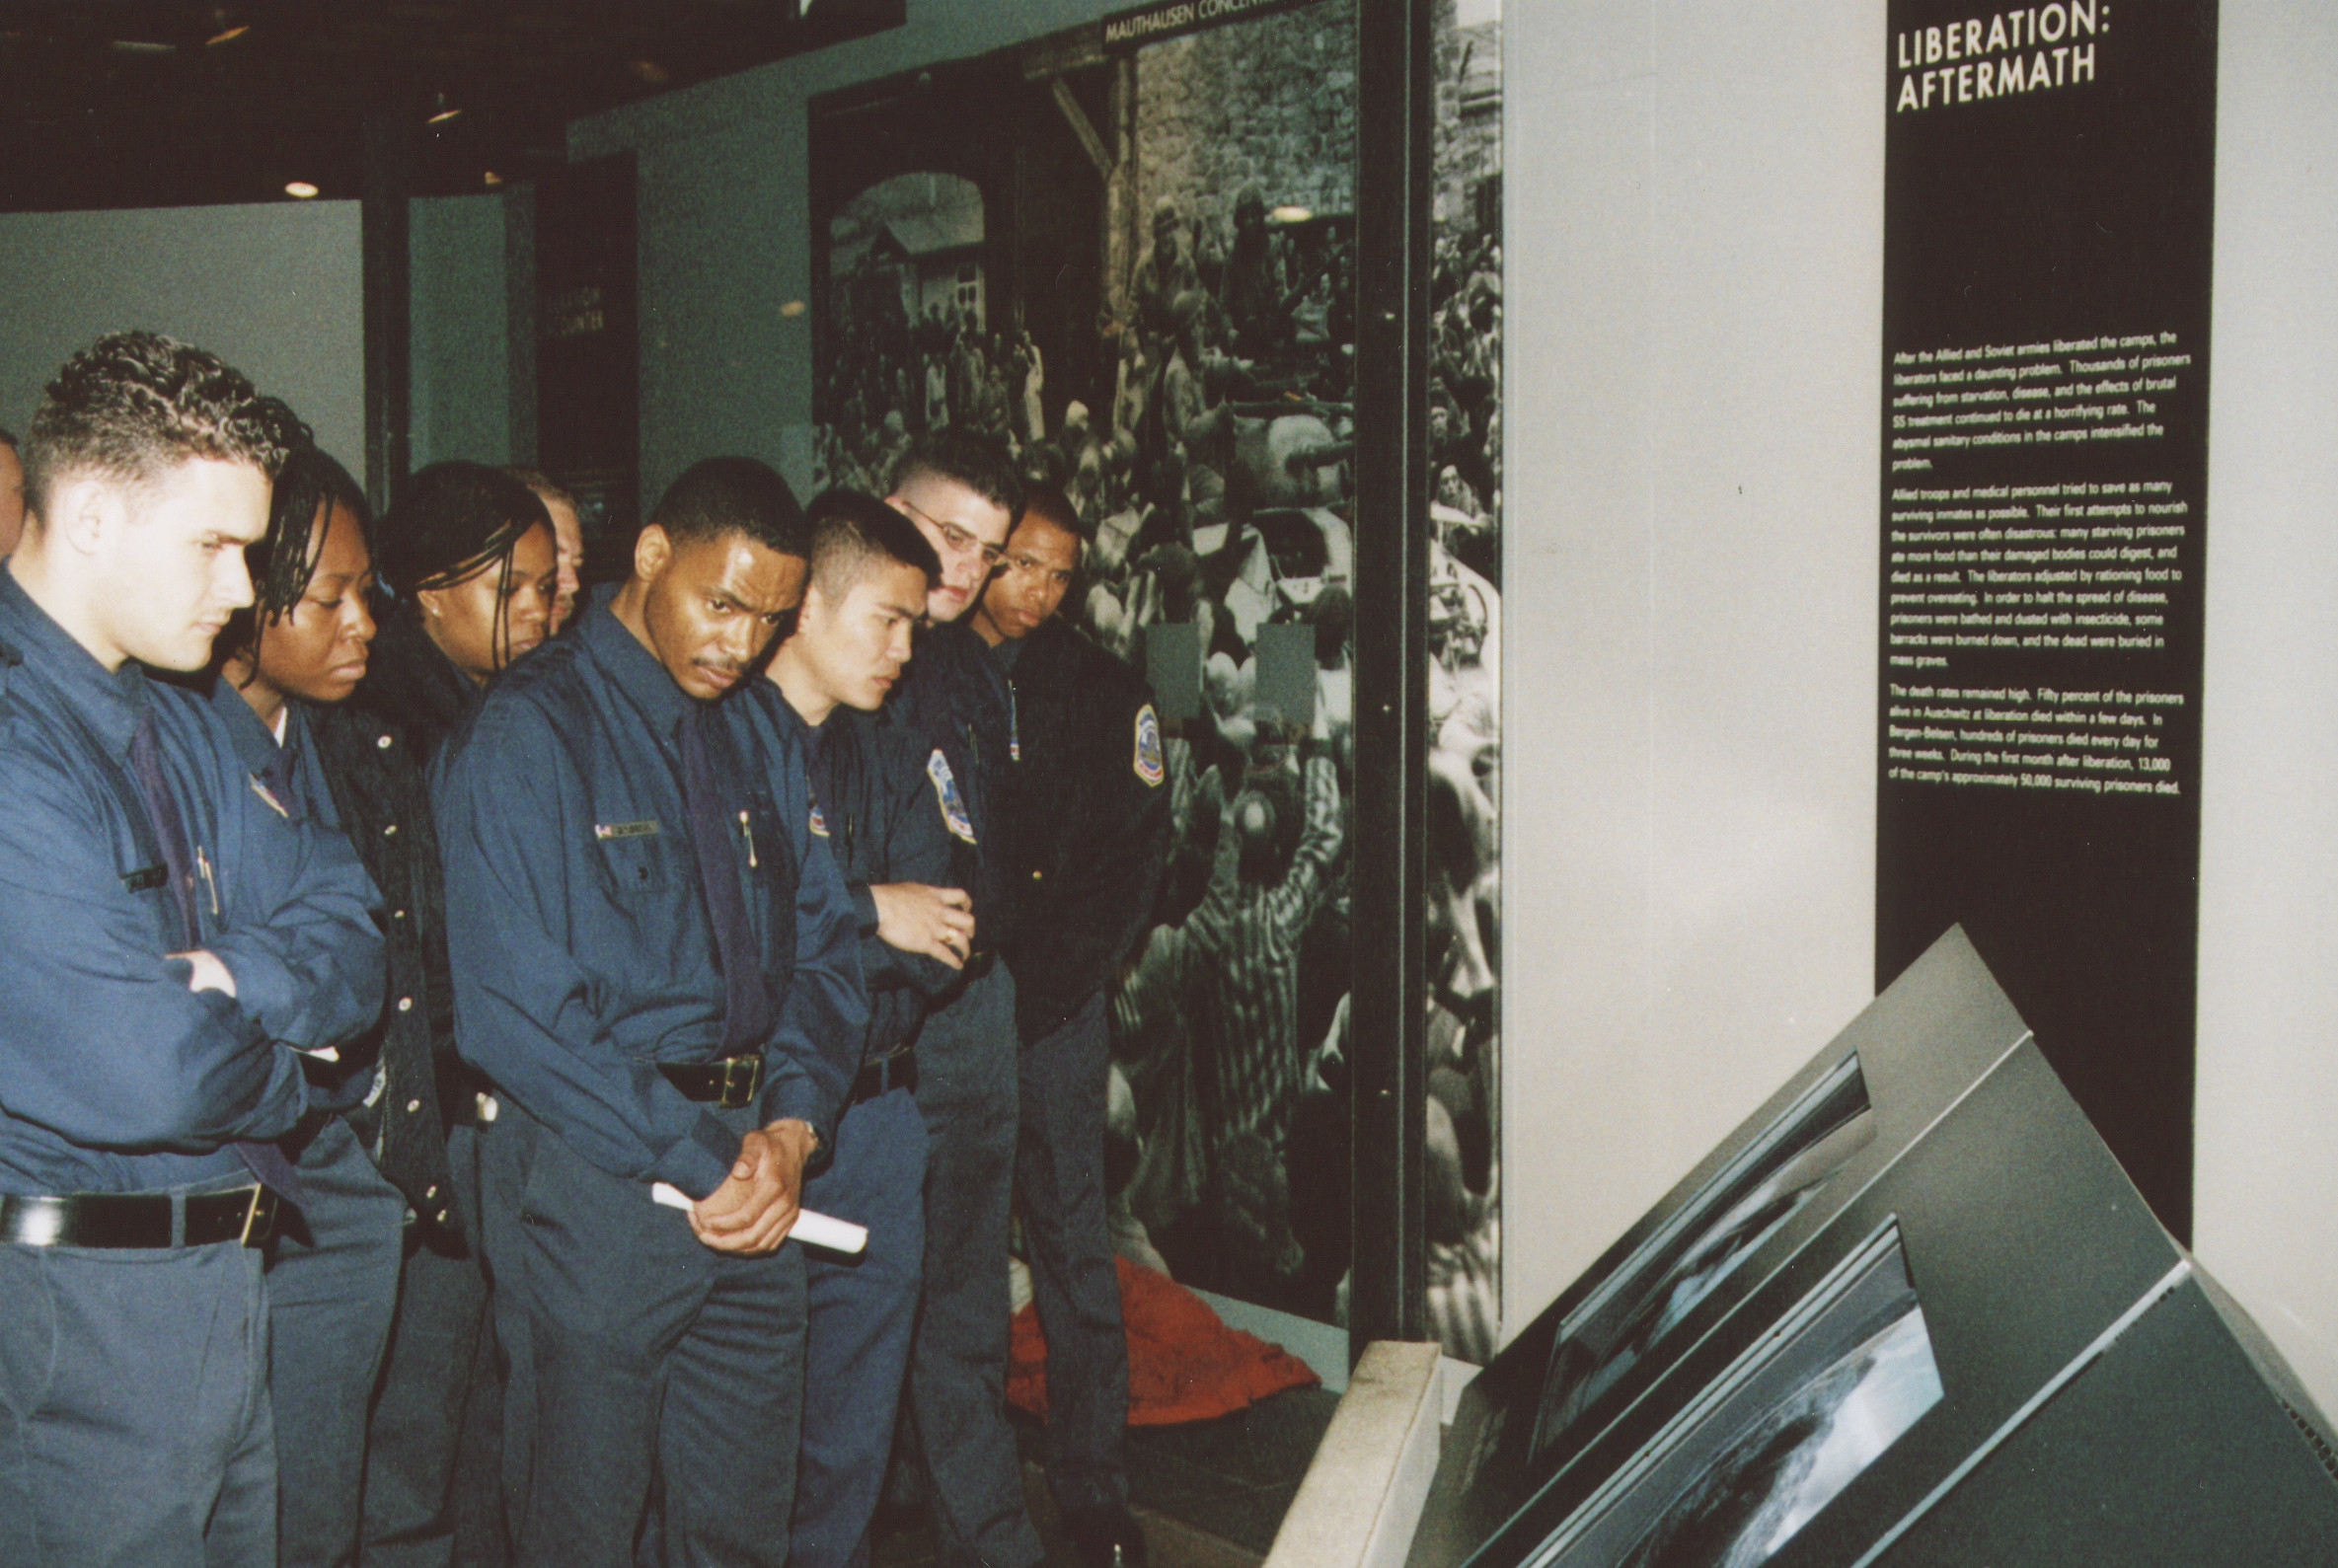 DC police training squad visits the U.S. Holocaust Memorial Museum.  Officers view the Liberation segment of the Permanent Exhibition.